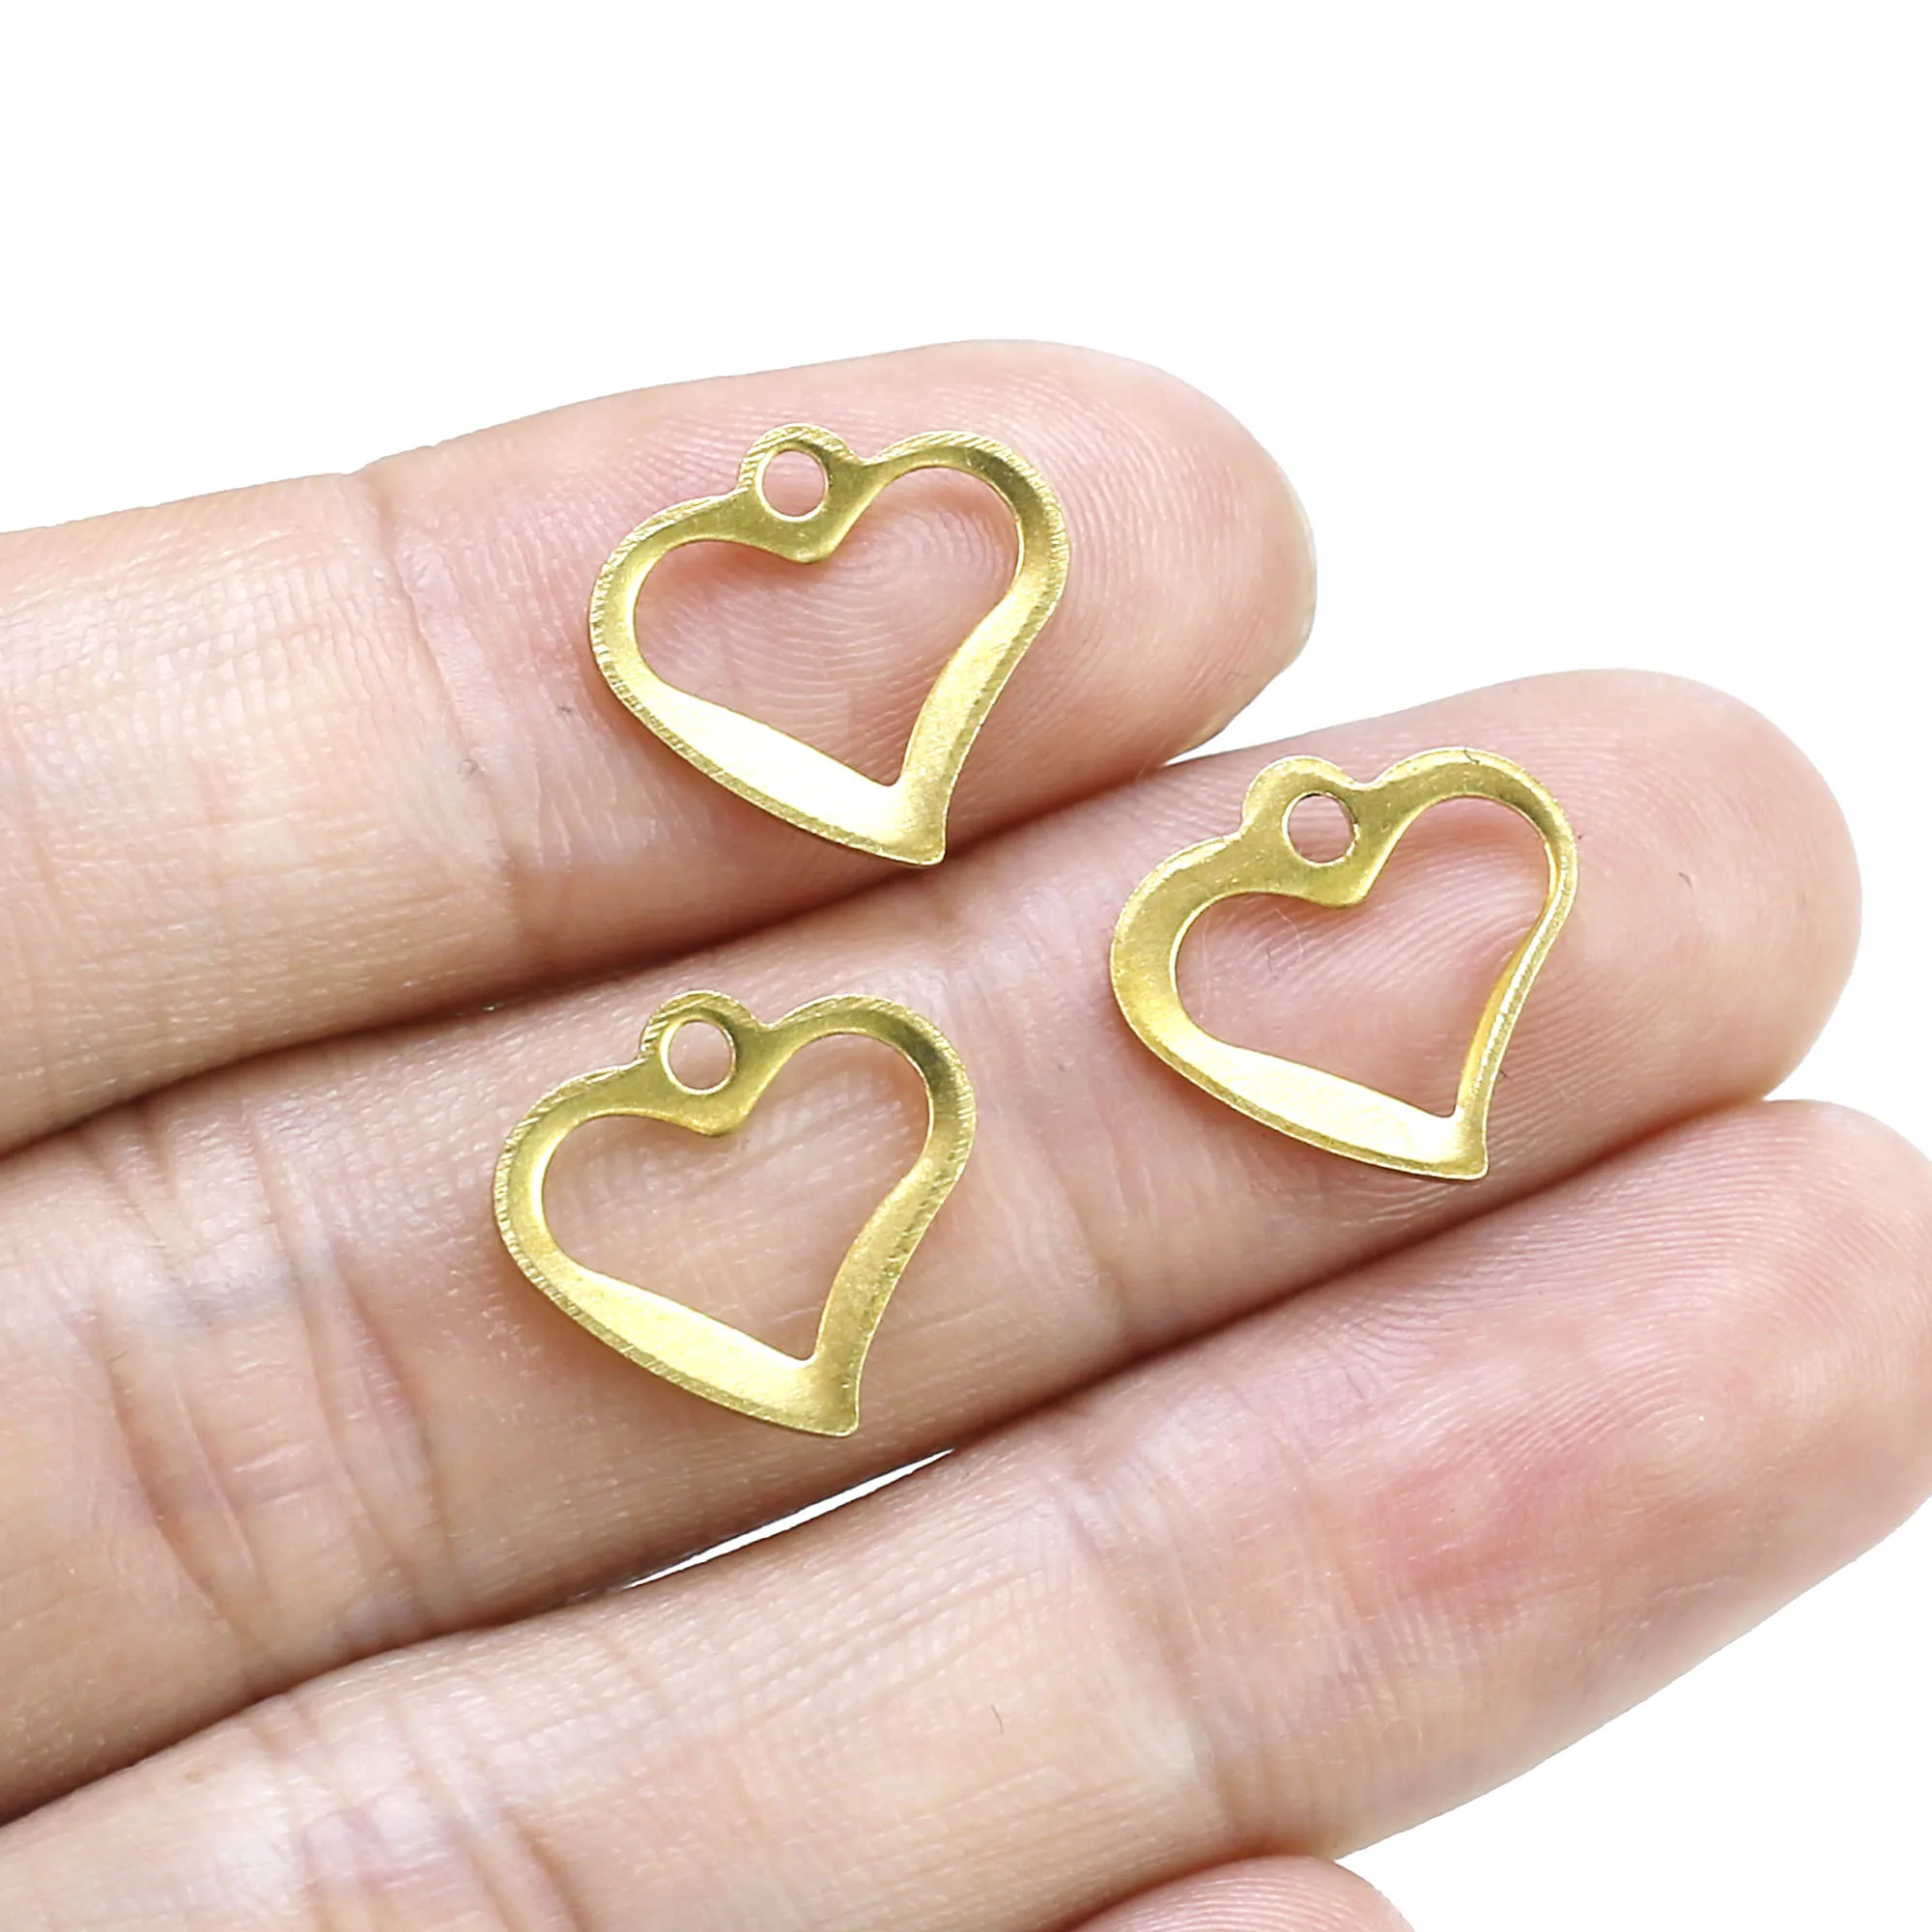 

50pcs Tiny Heart Earring Charms, Brass Heart Charm, 13x13.7mm, Earring Findings, Slight Textured, Jewelry Making R2565